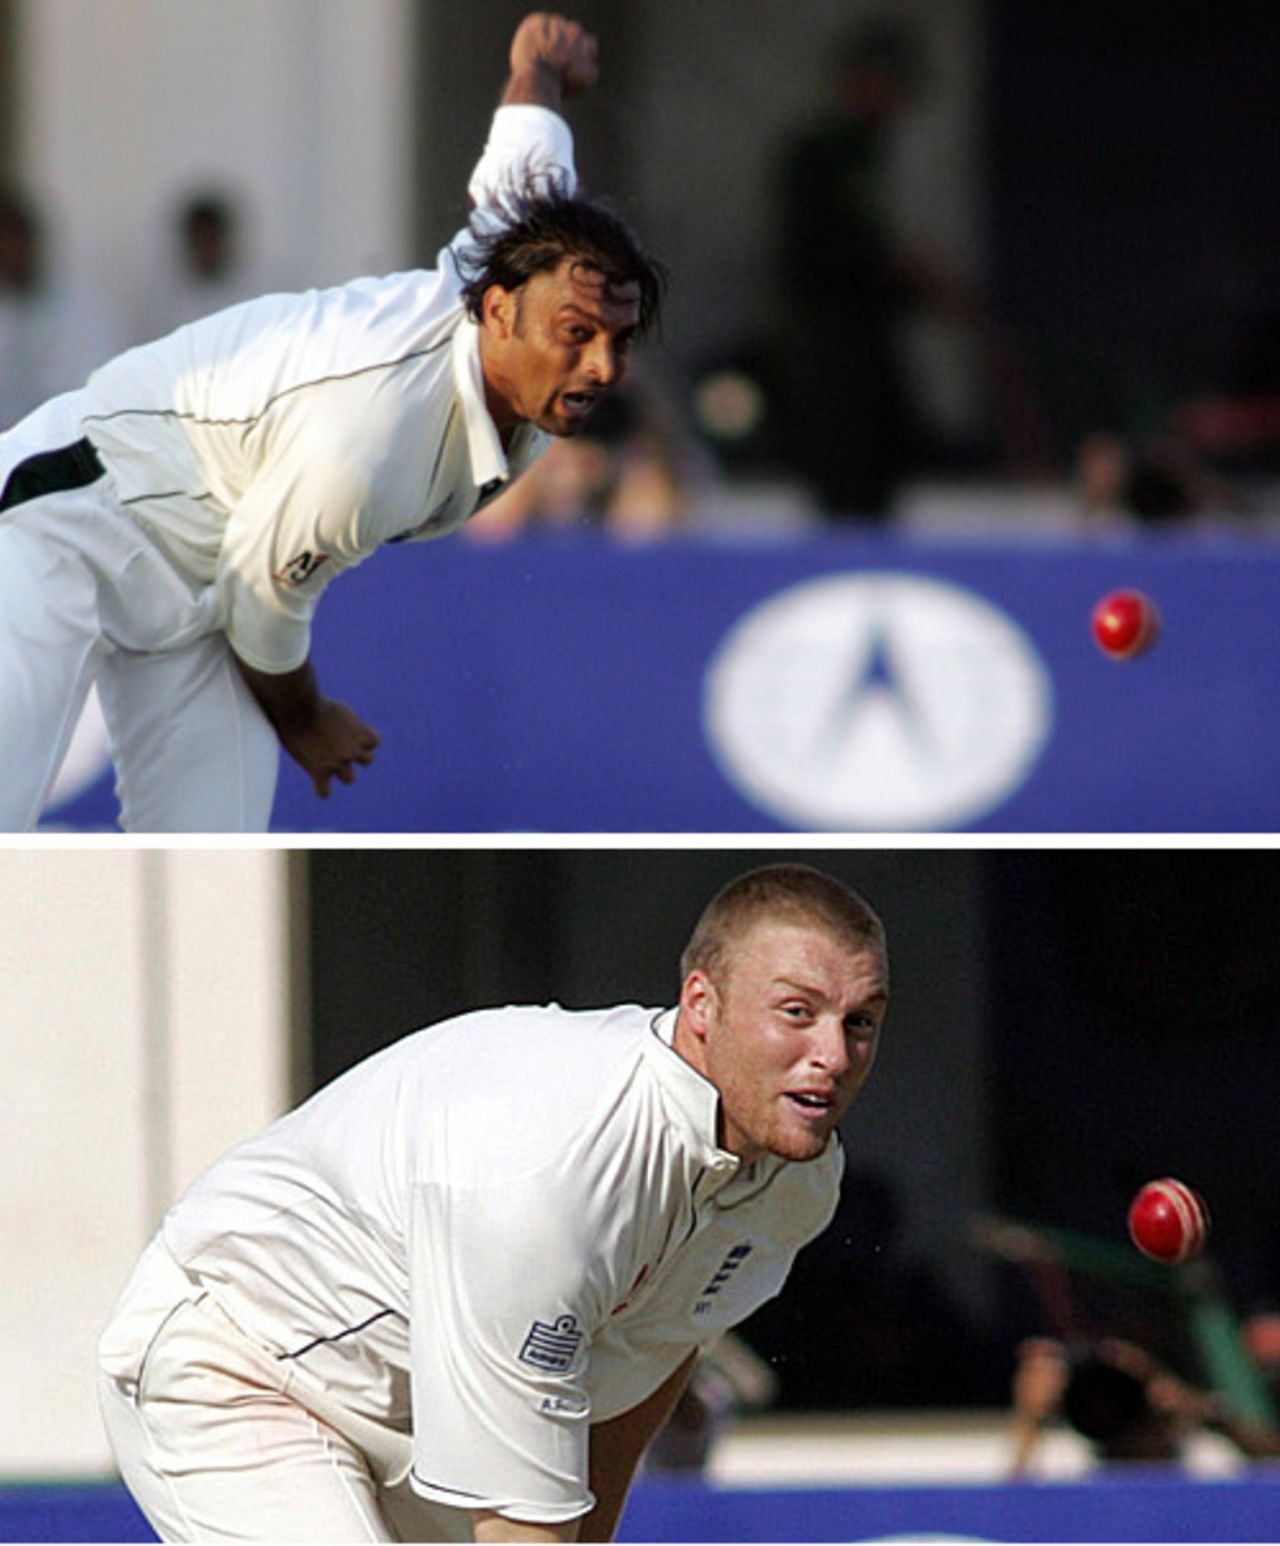 Contrasting bowlers: Andrew Flintoff and Shoaib Akhtar, 1st Test, Multan, November 15, 2005